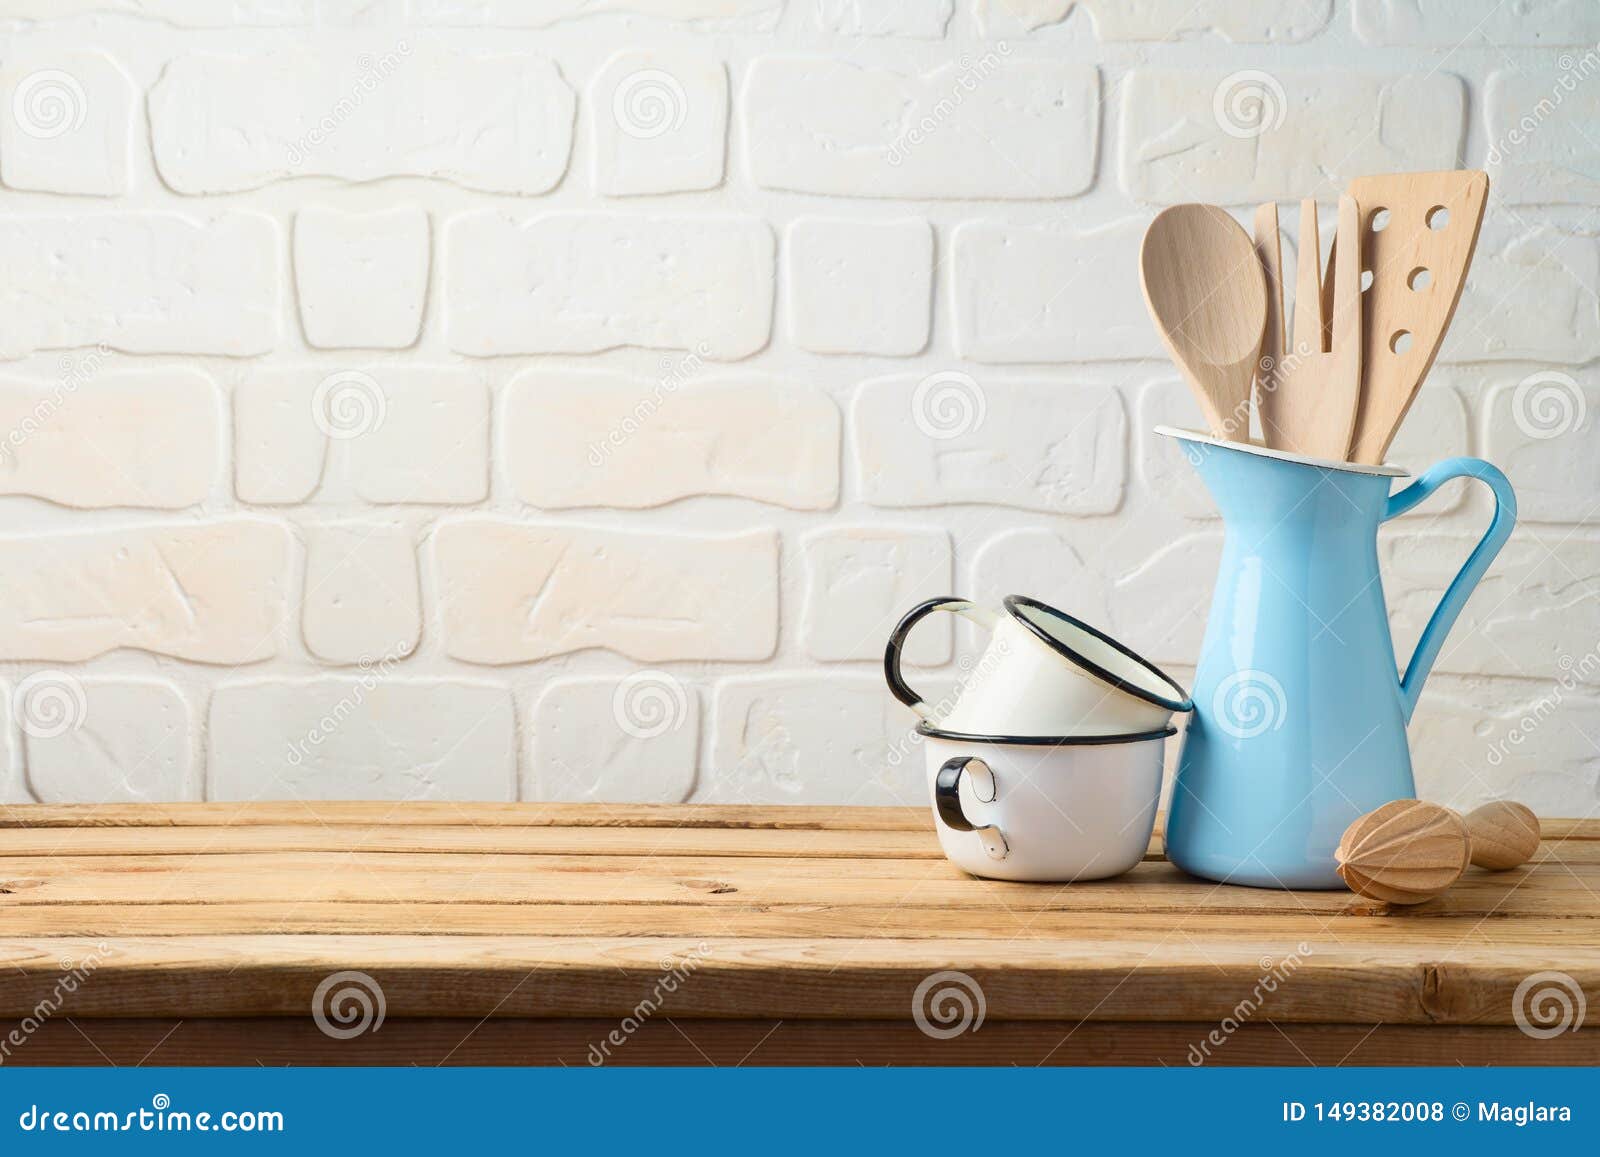 vintage kitchen utensils and tableware on wooden table